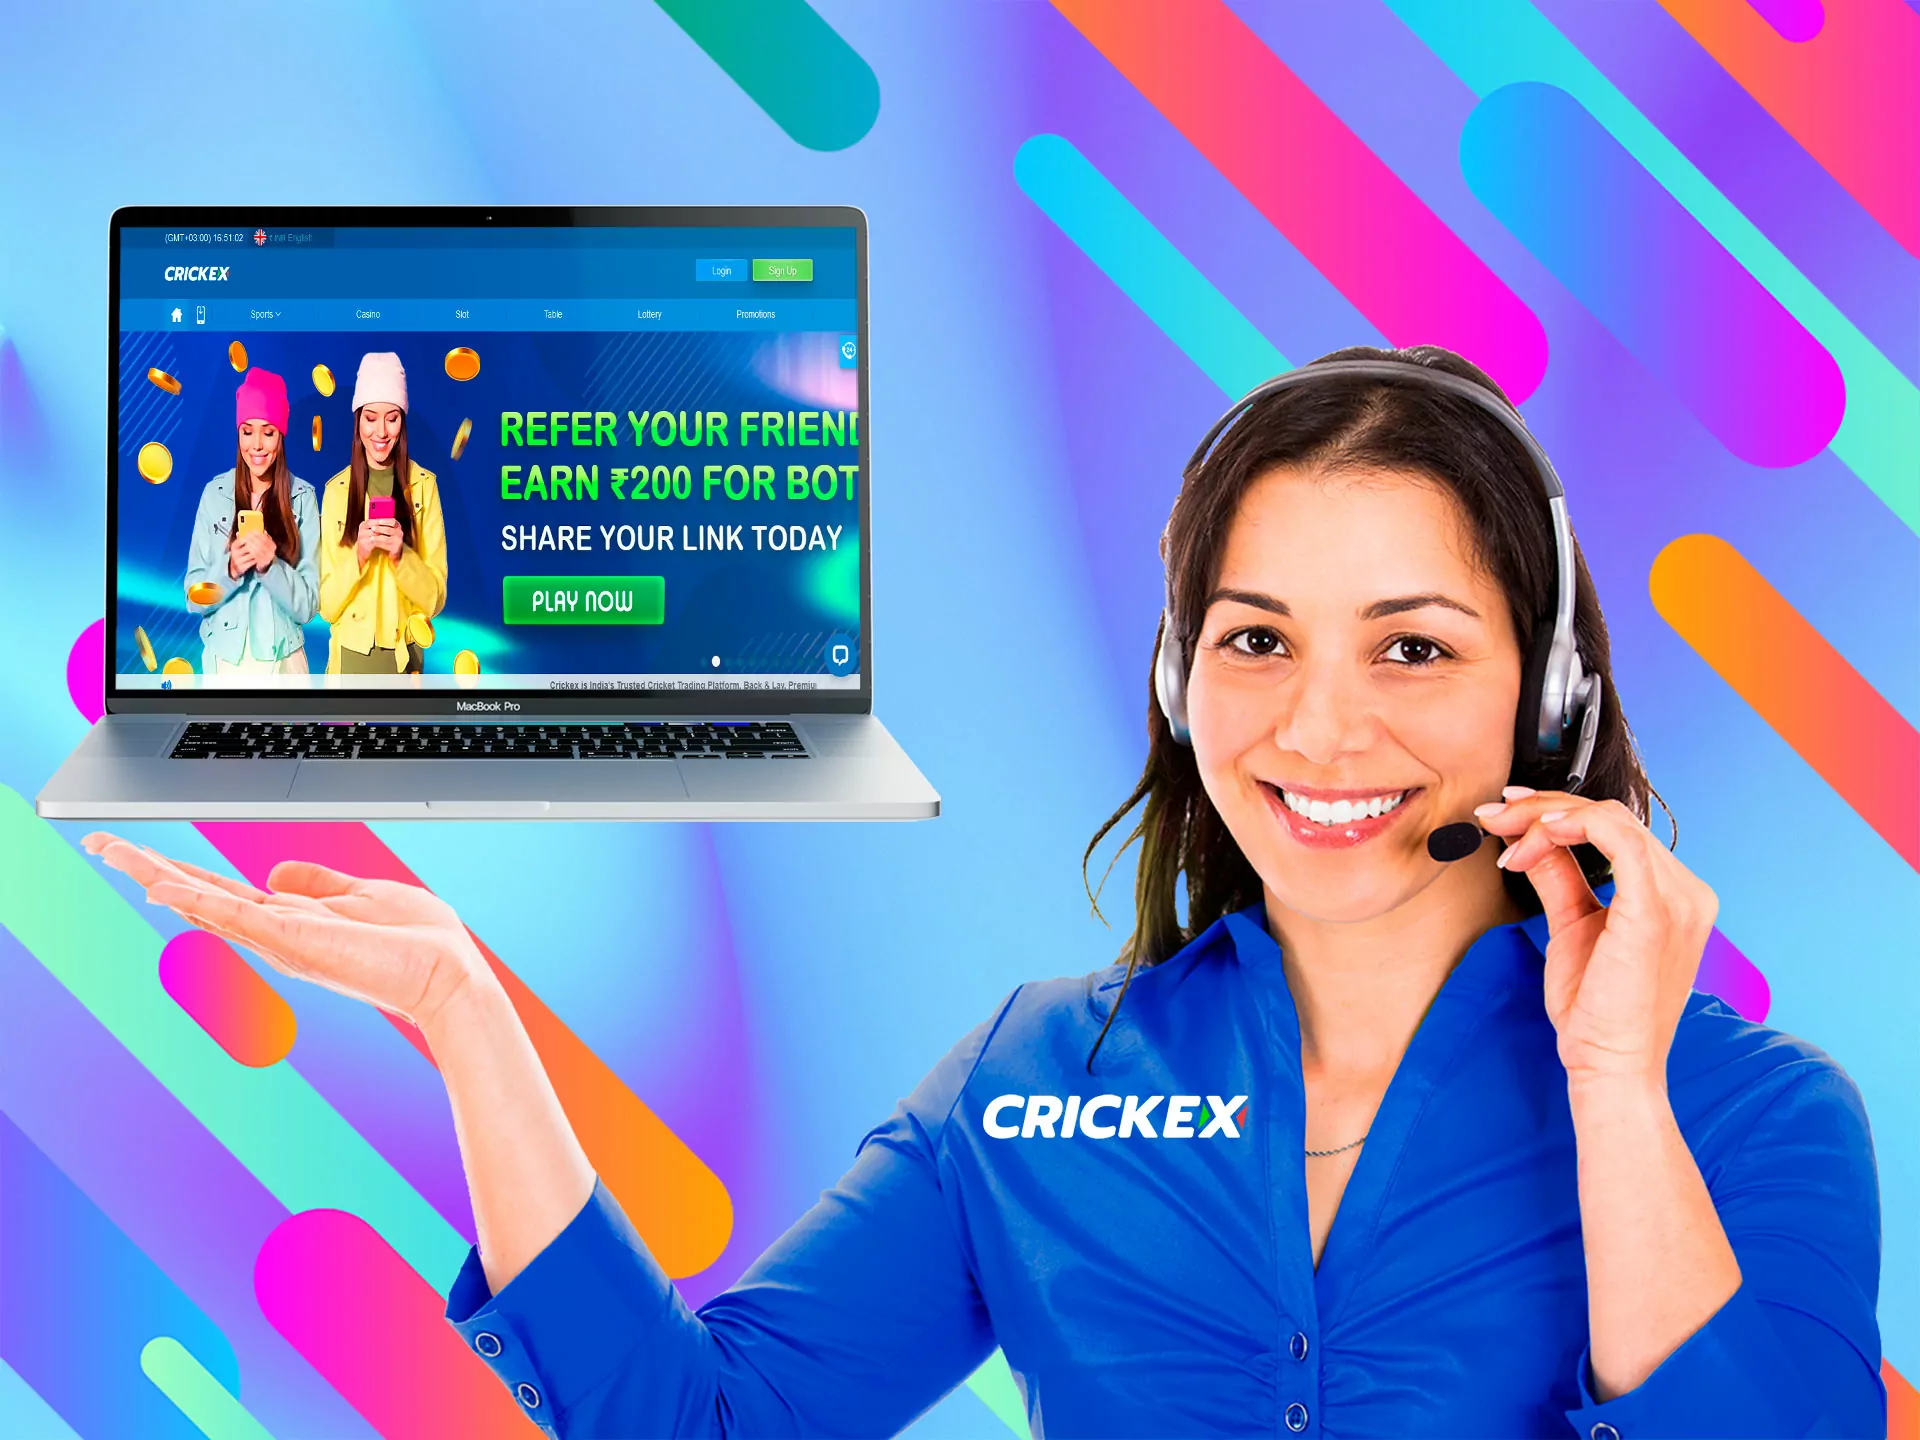 If you have any questions about using the bookmaker, Crickex experts will help you.